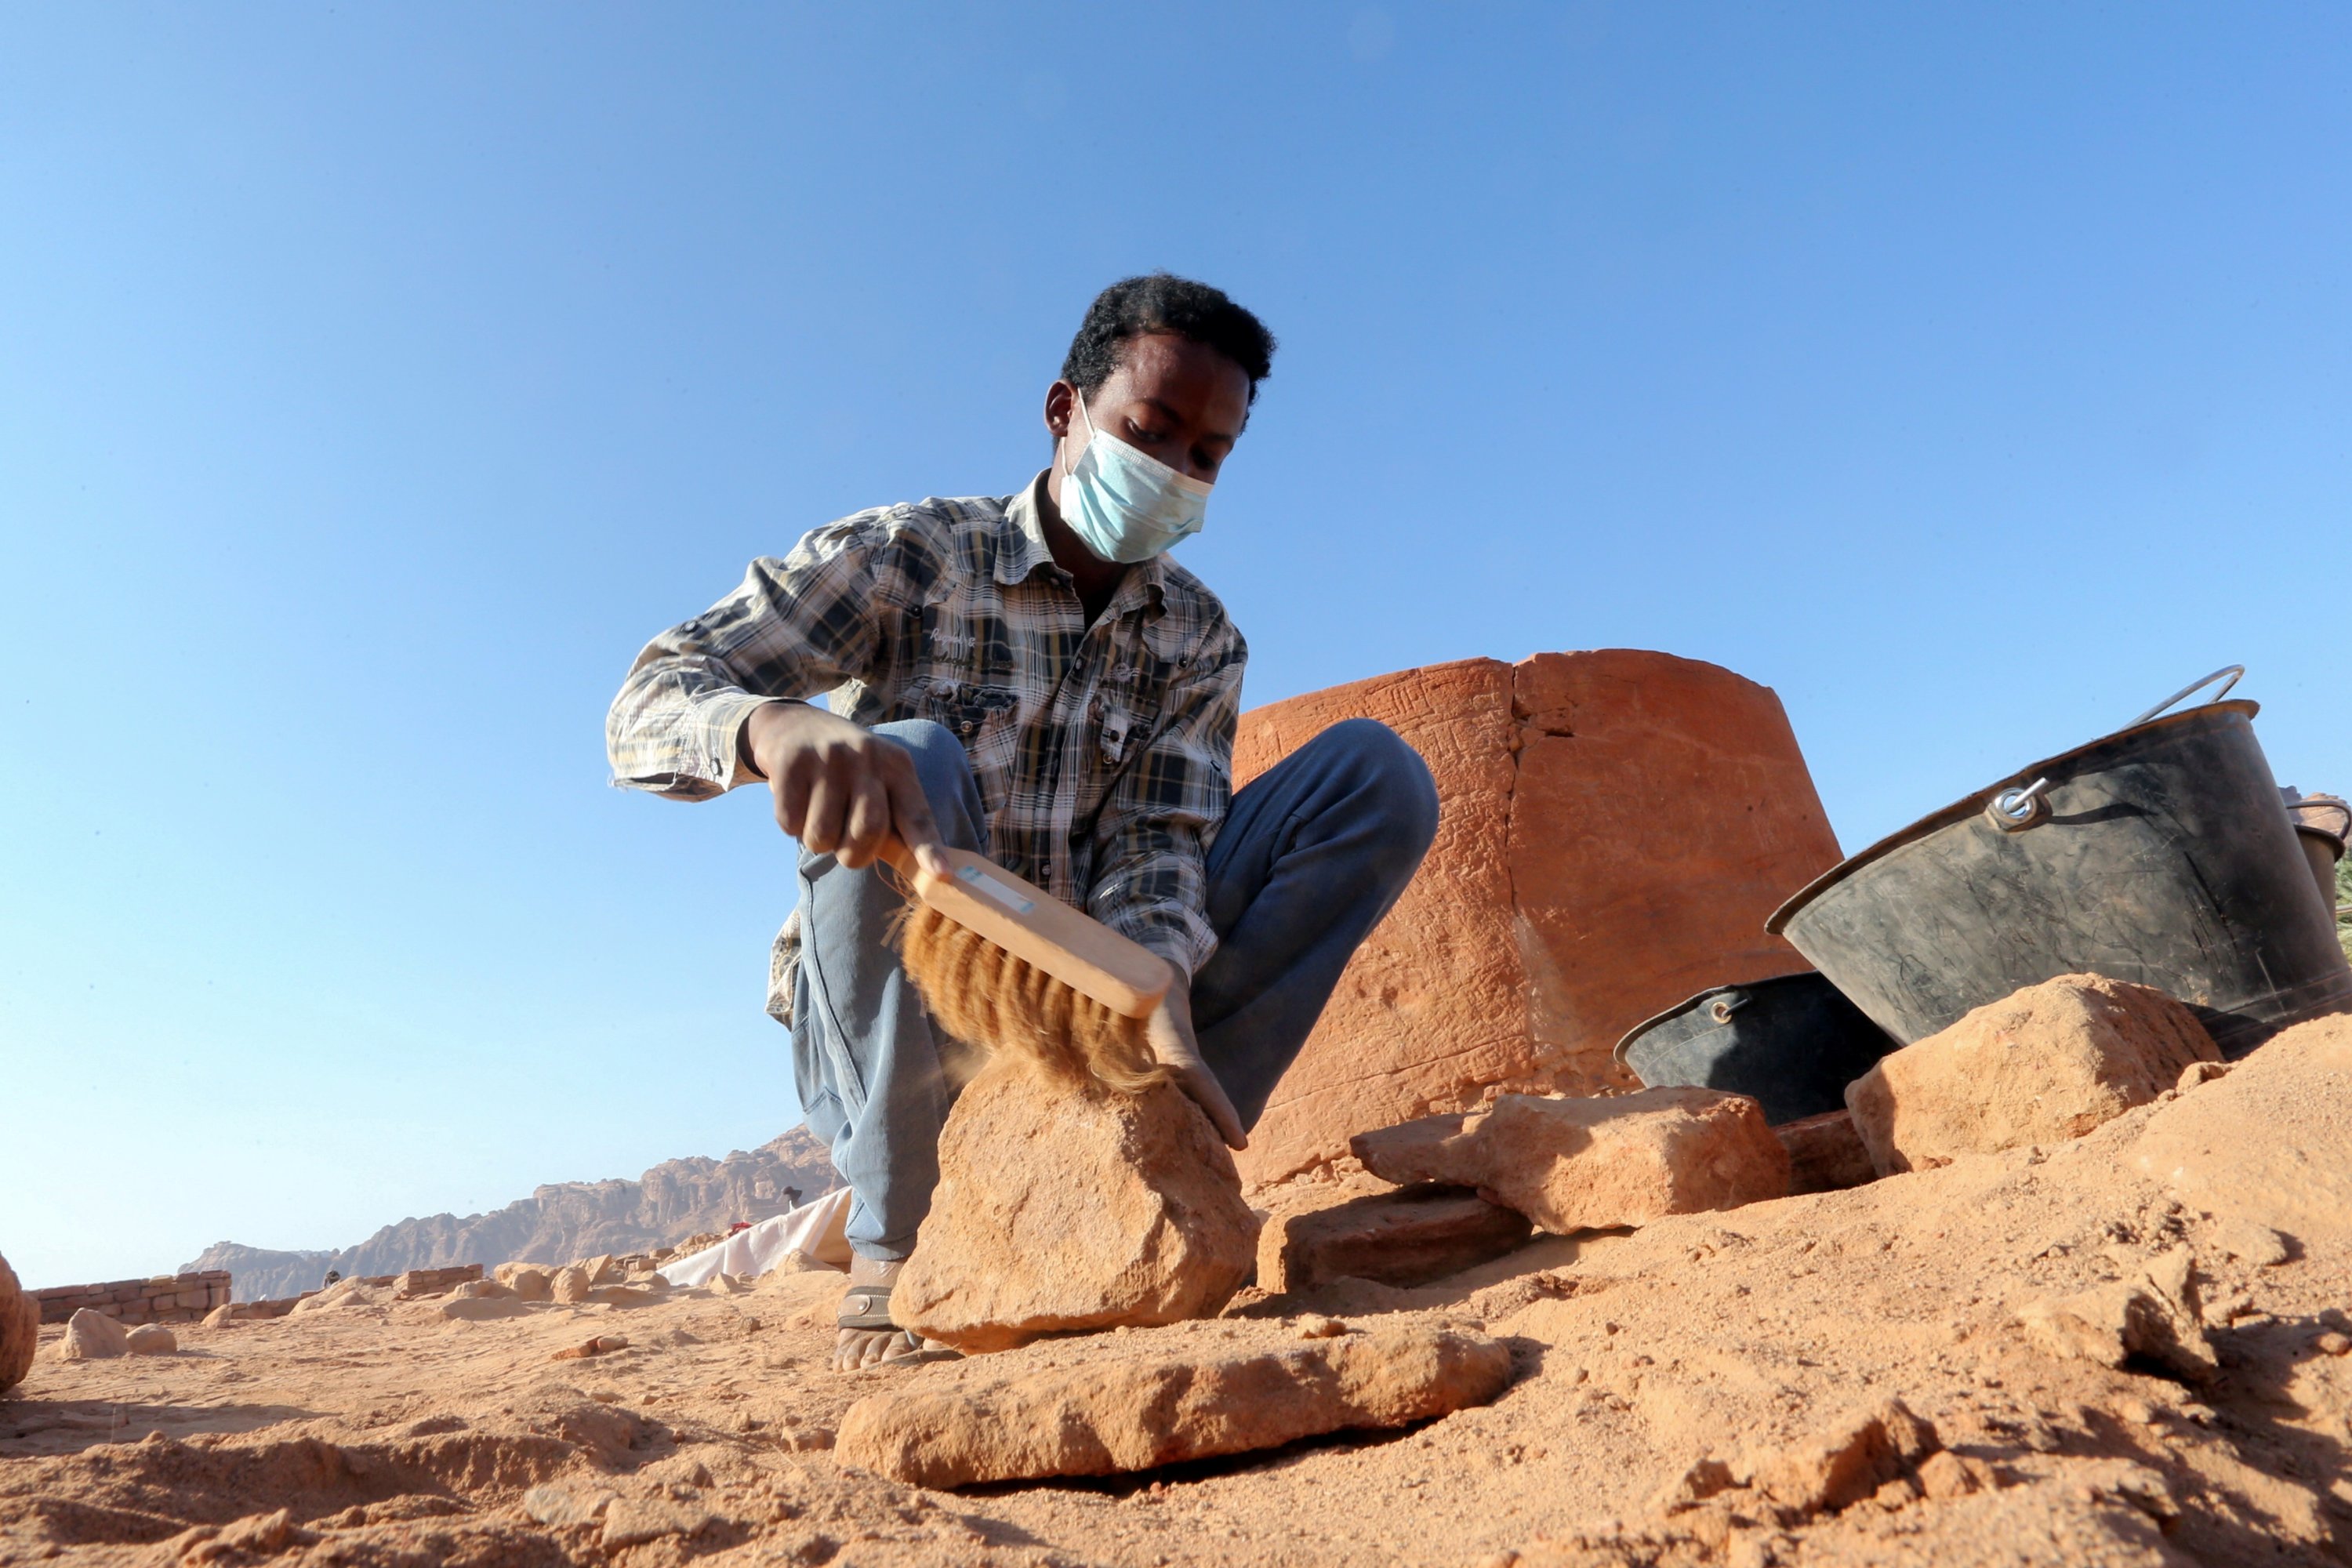 An archaeologist carefully cleans the pottery to examine the findings known to be from the Dadan and Lihyan civilization dated 1,000 B.C., Al-Ula, Saudi Arabia, Oct. 30, 2021. (Reuters Photo)